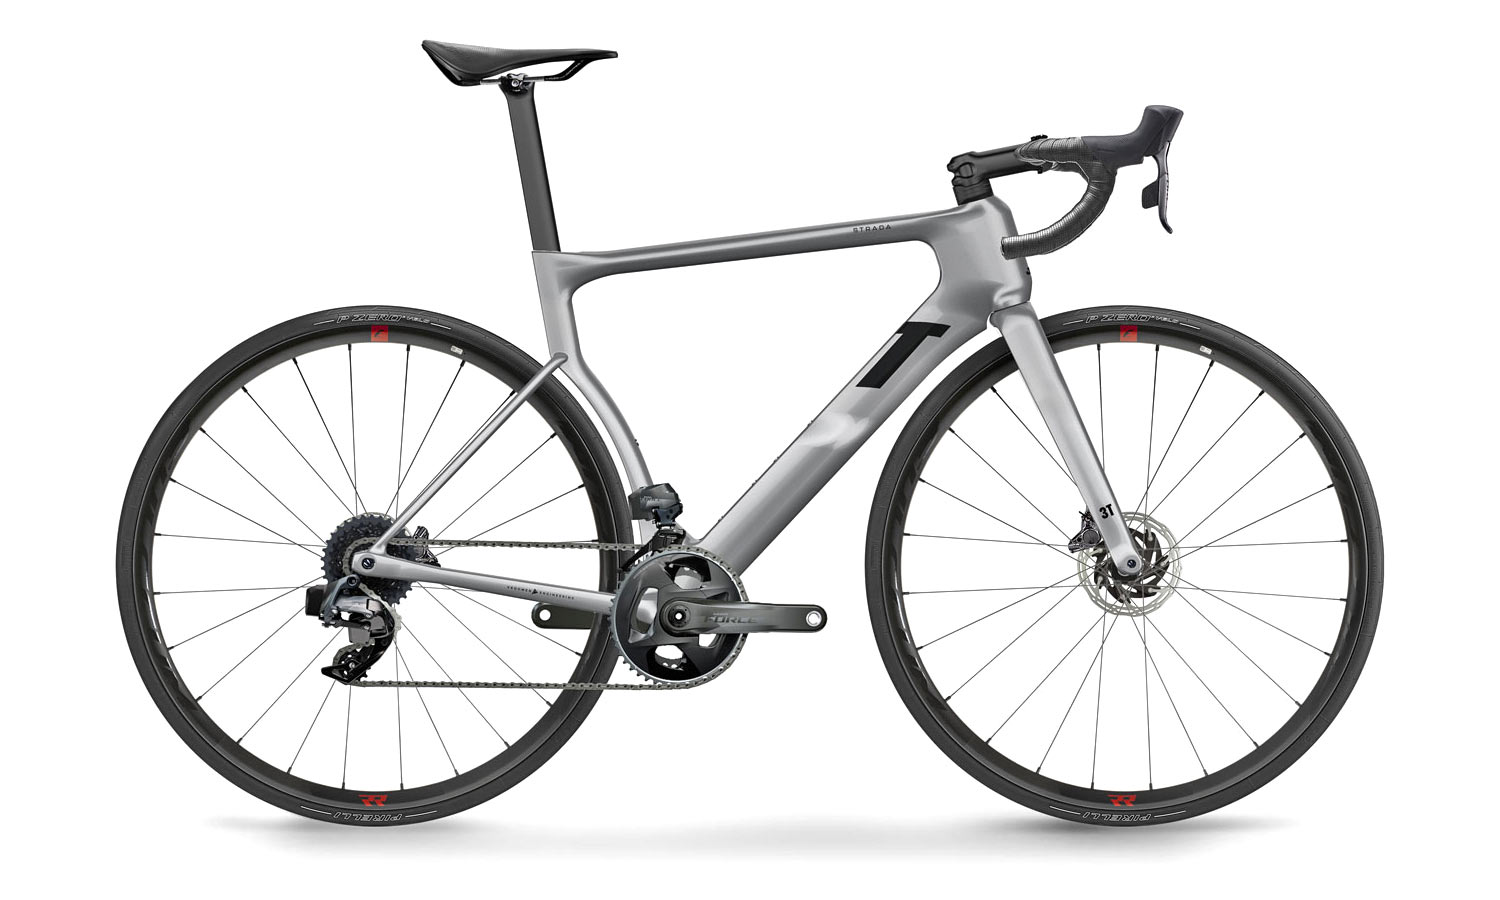 2023 New 3T Strada aero road bike updated with integrated full internal routing, Force AXS